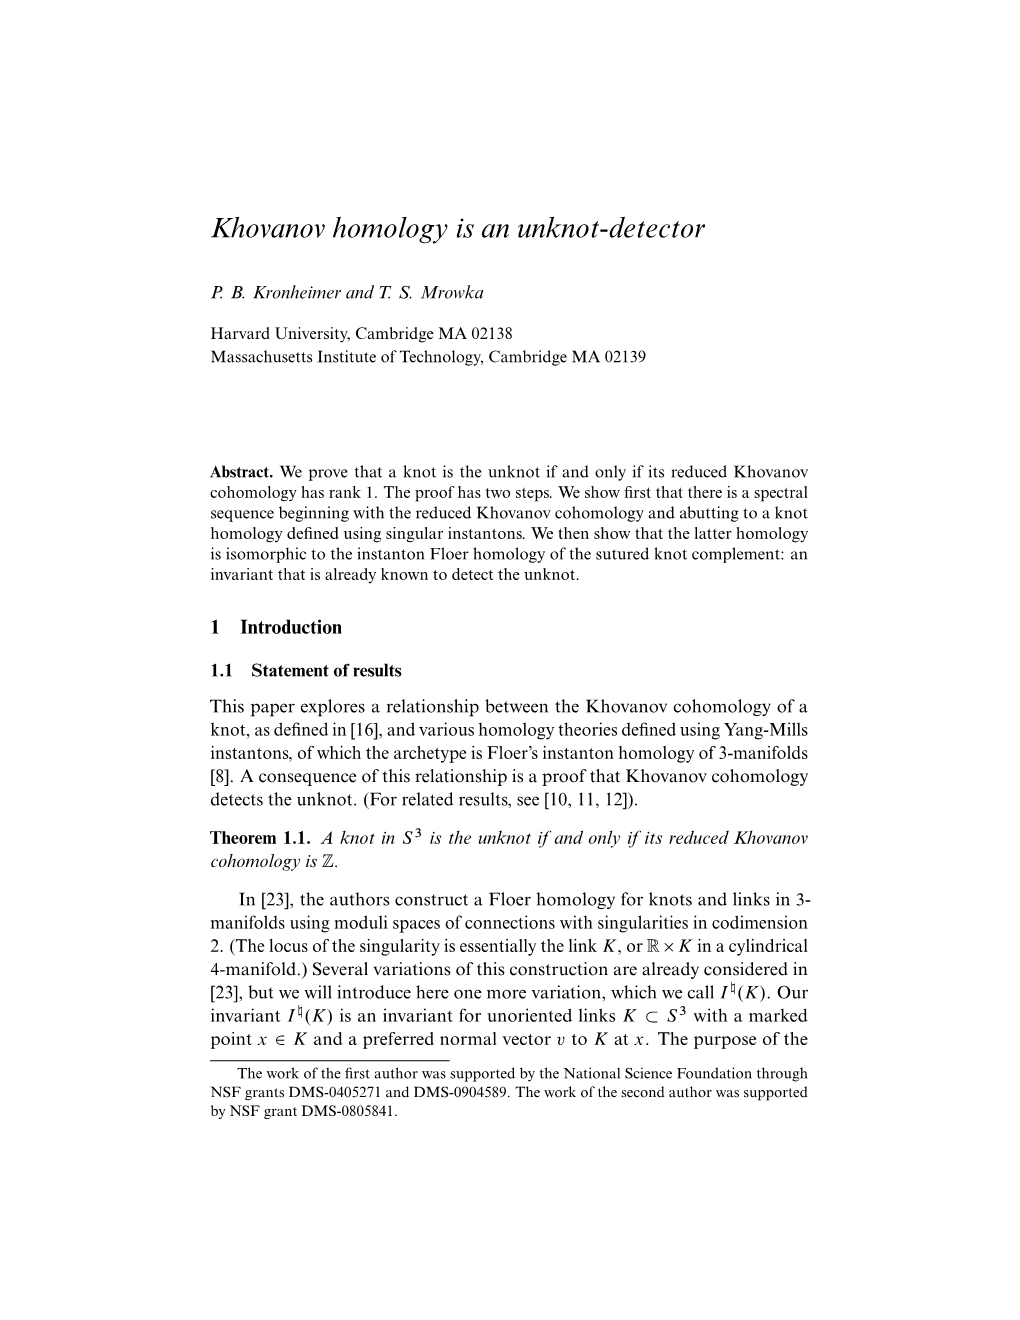 Khovanov Homology Is an Unknot-Detector